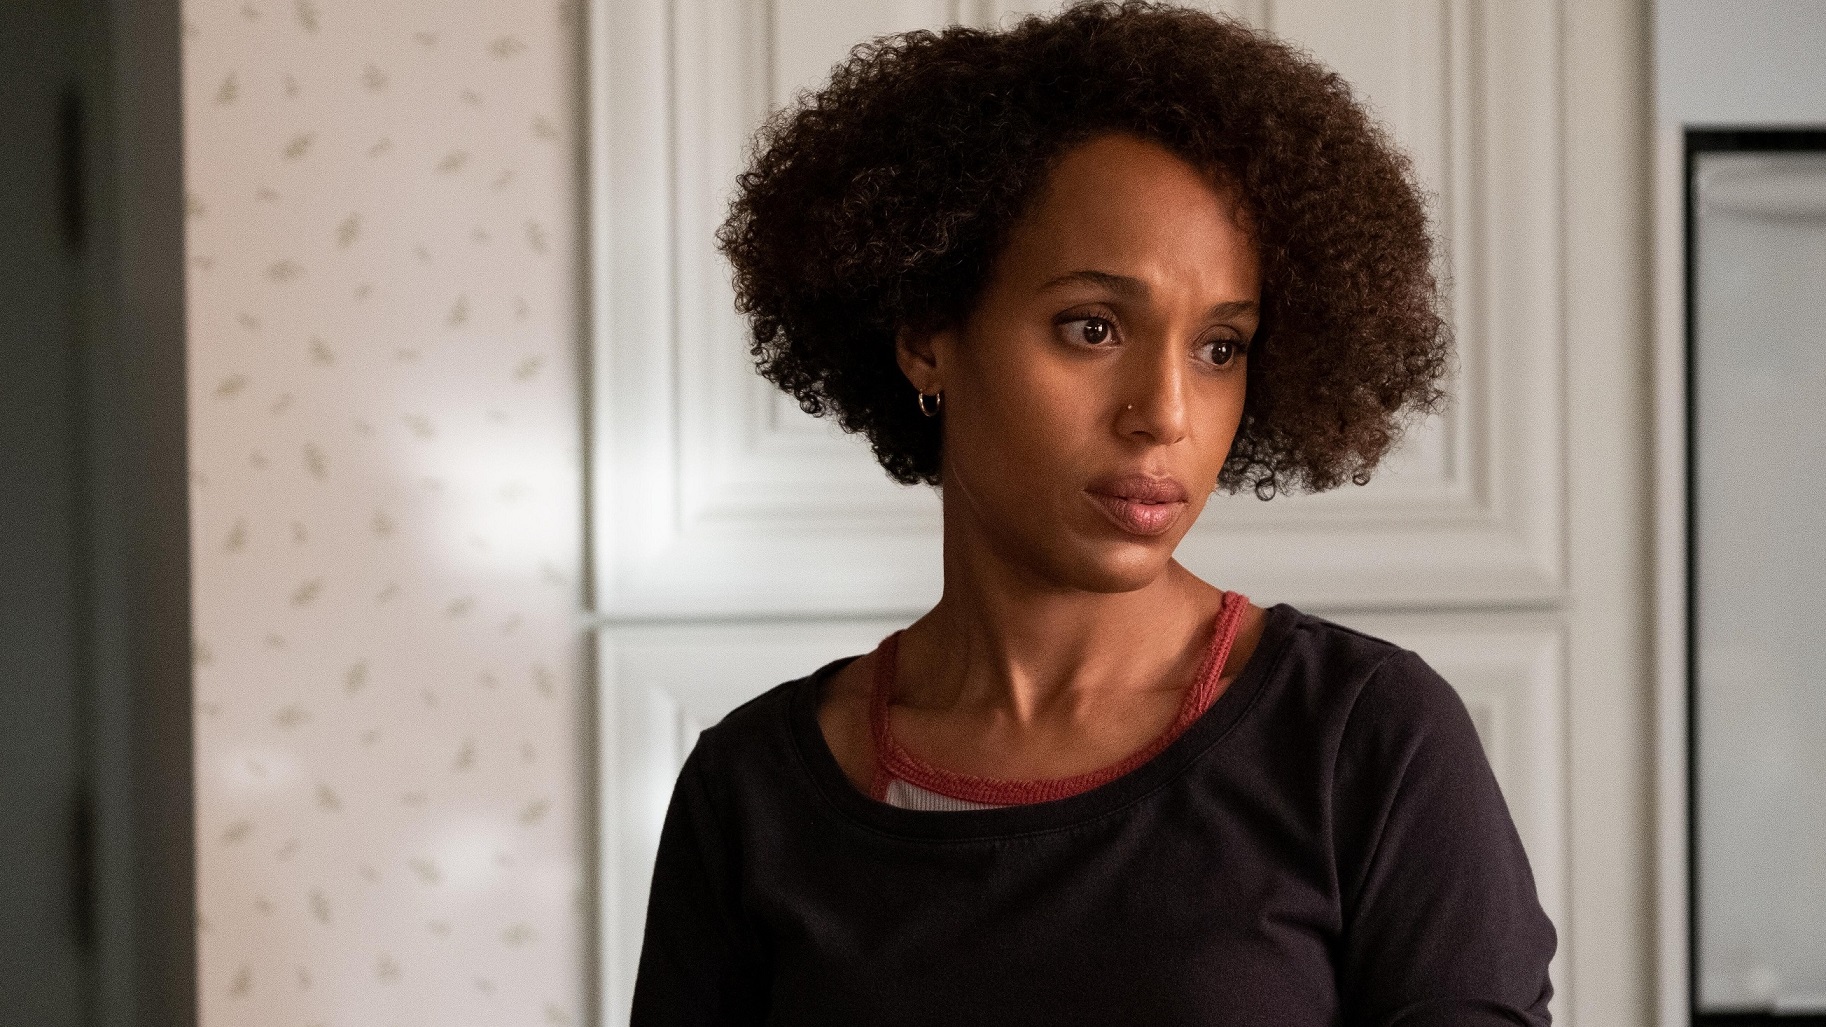 Kerry Washington Will Lead “Unprisoned,” Onyx Collective Comedy About a Therapist & Single Mom